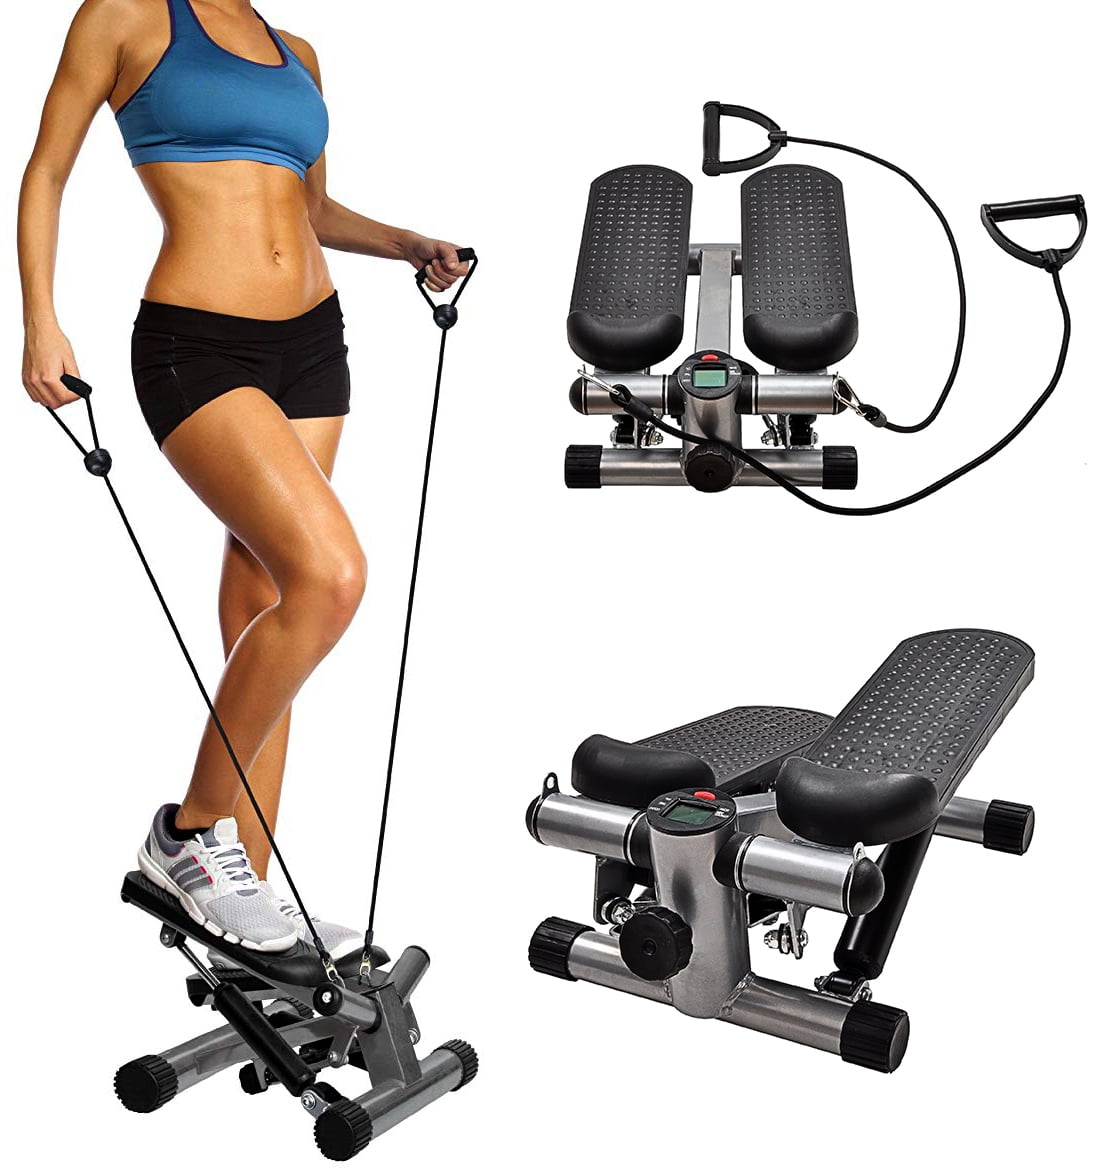 Cabaña omitir Sip BalanceFrom Adjustable Mini Stepper with LCD Monitor Stepping Machine,  Comes with Resistance Bands - Walmart.com